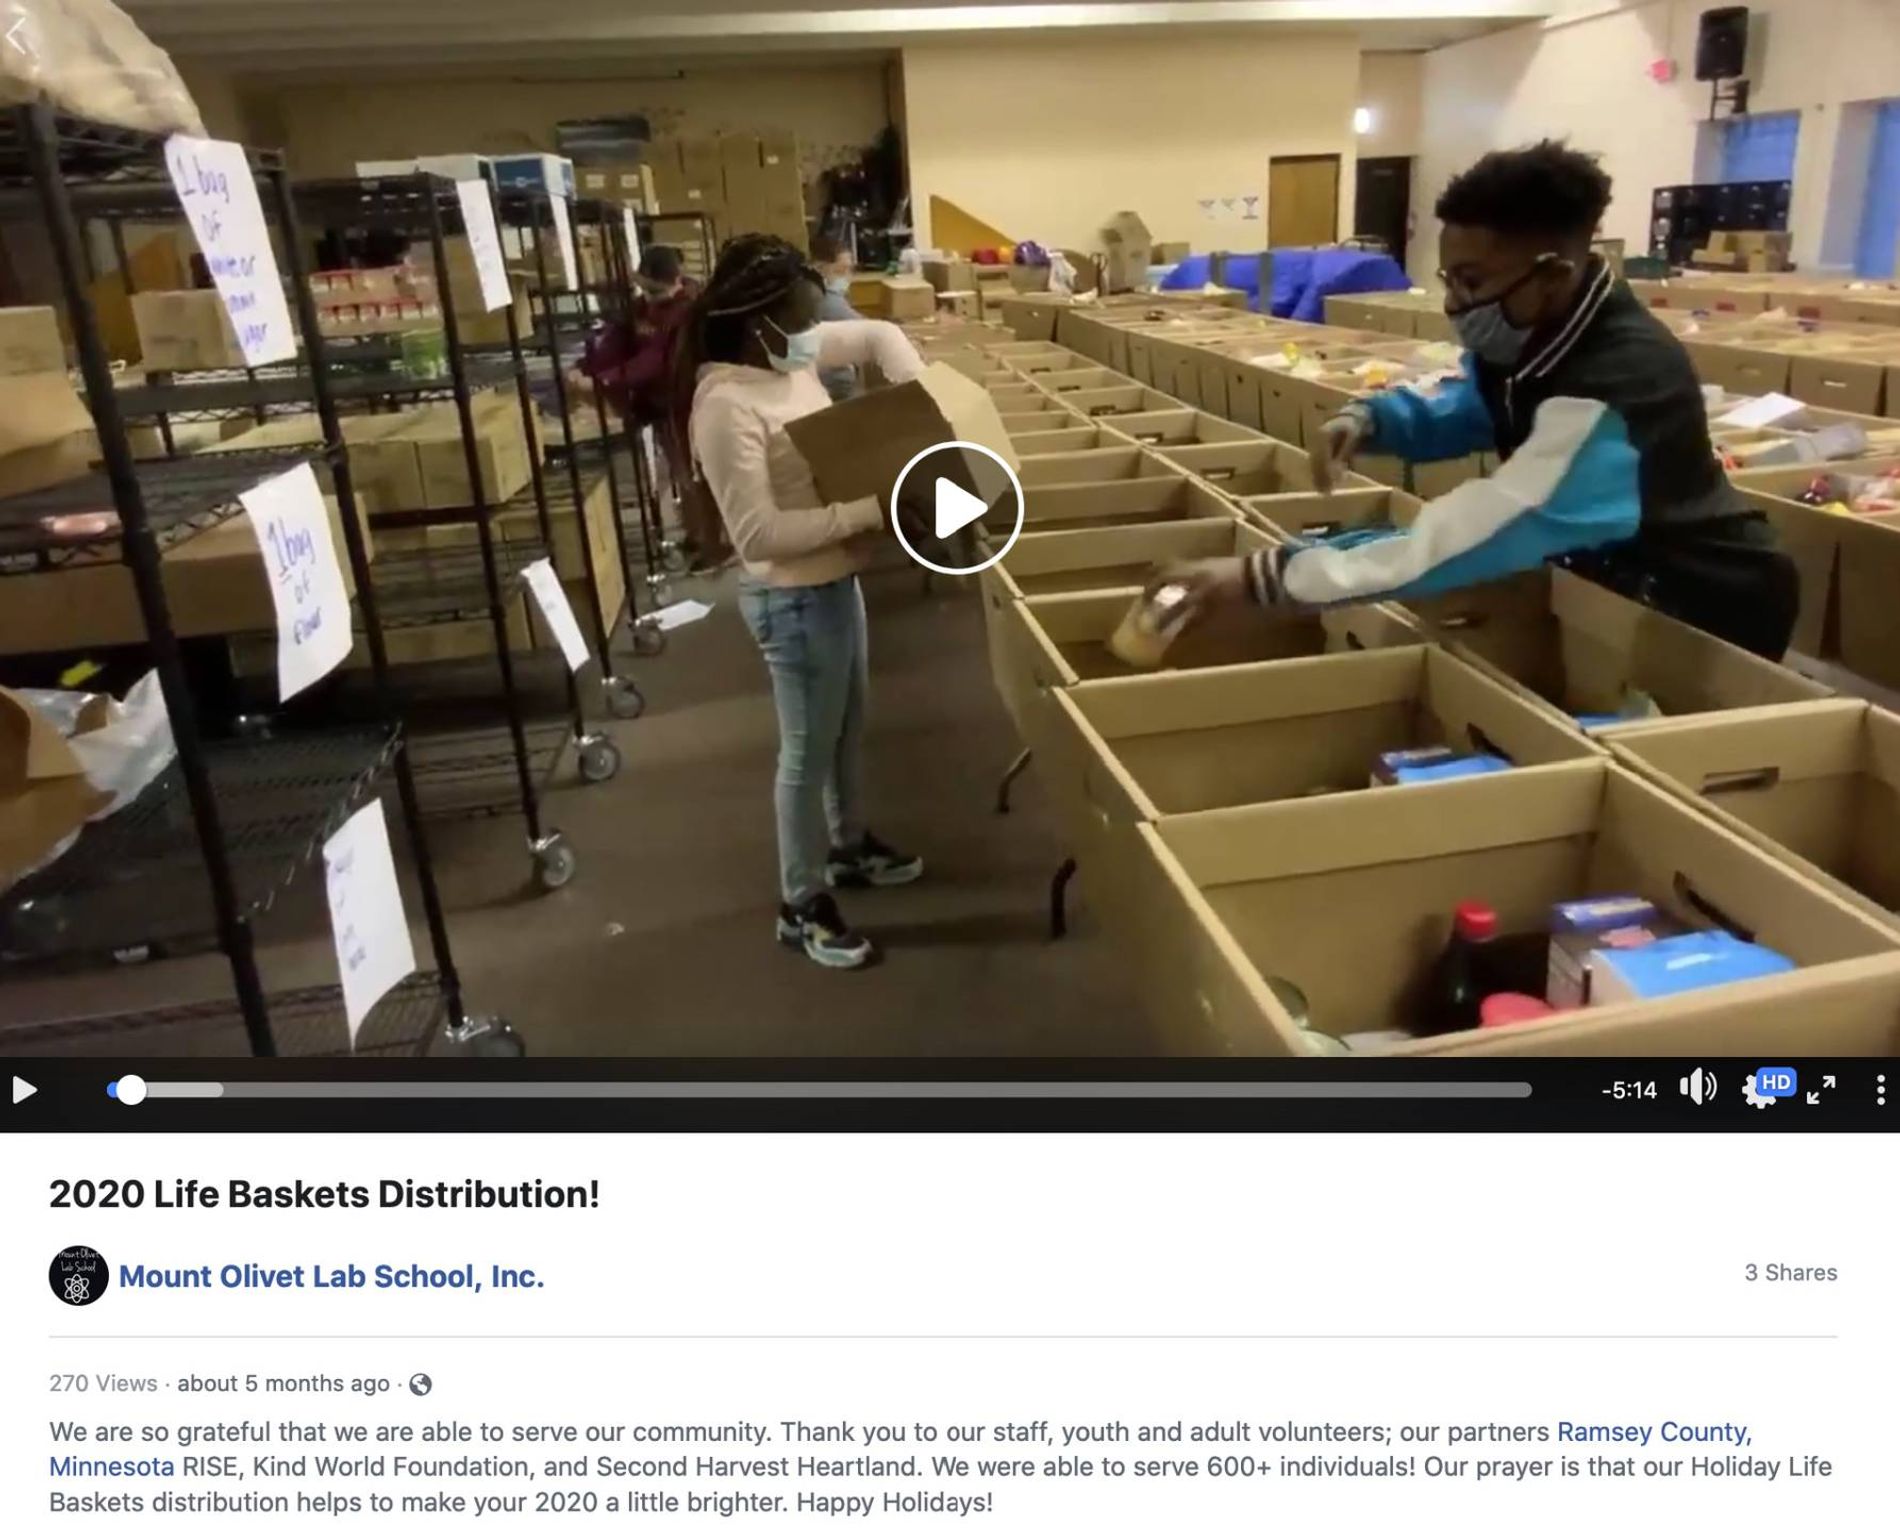 A Facebook post from the Mount Olivet Lab School about their Holiday Life Baskets distribution triumph.